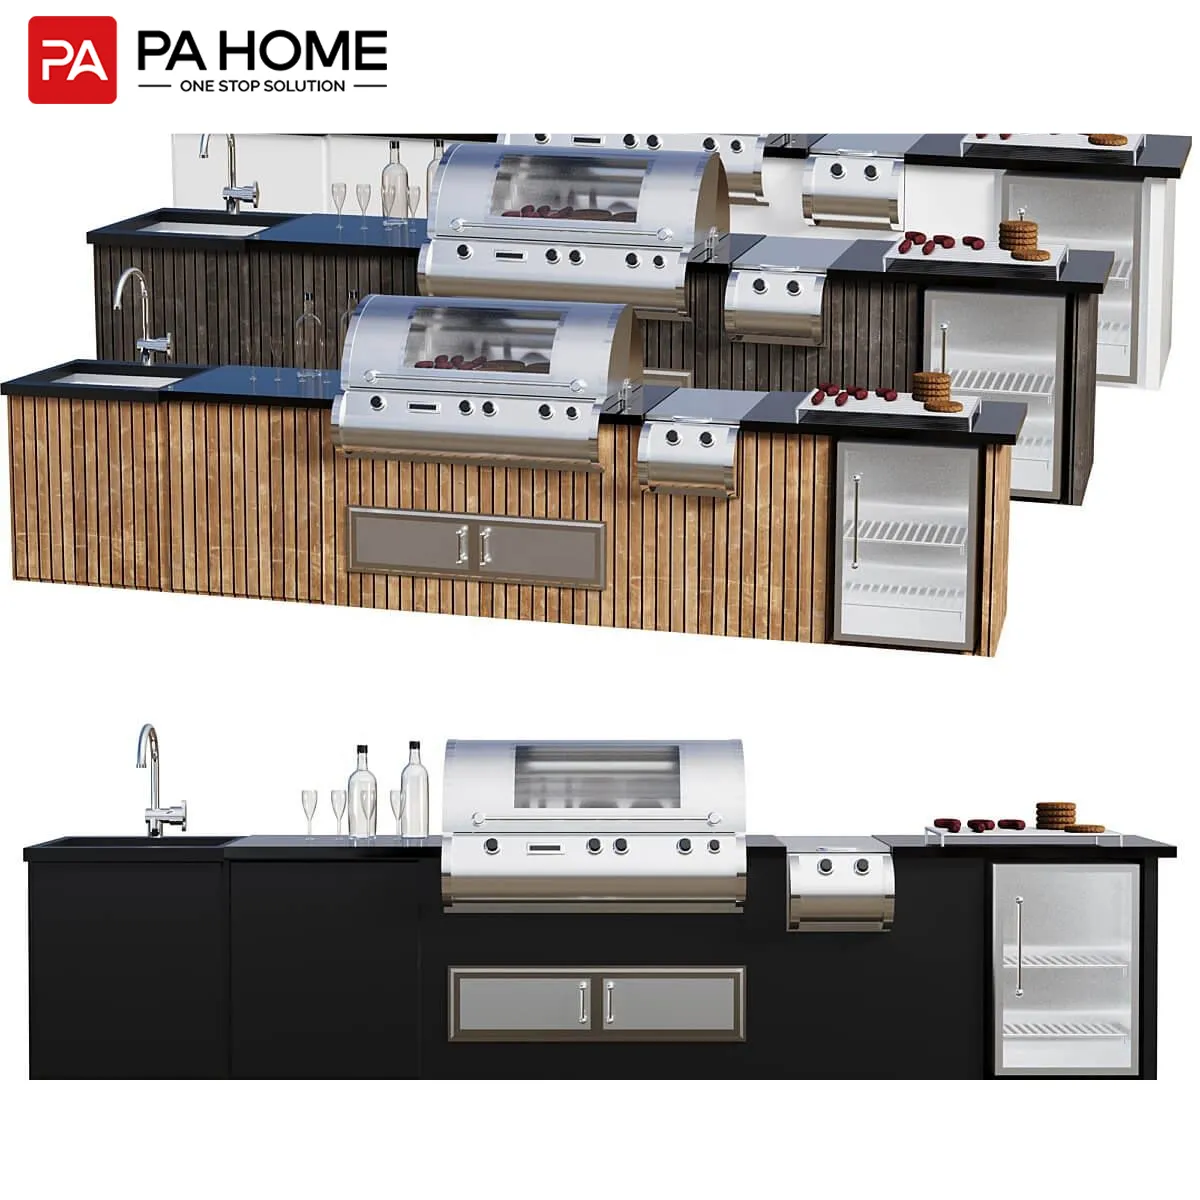 PA modern bbq island stainless steel outdoor kitchen grill with fridge sink base cabinets